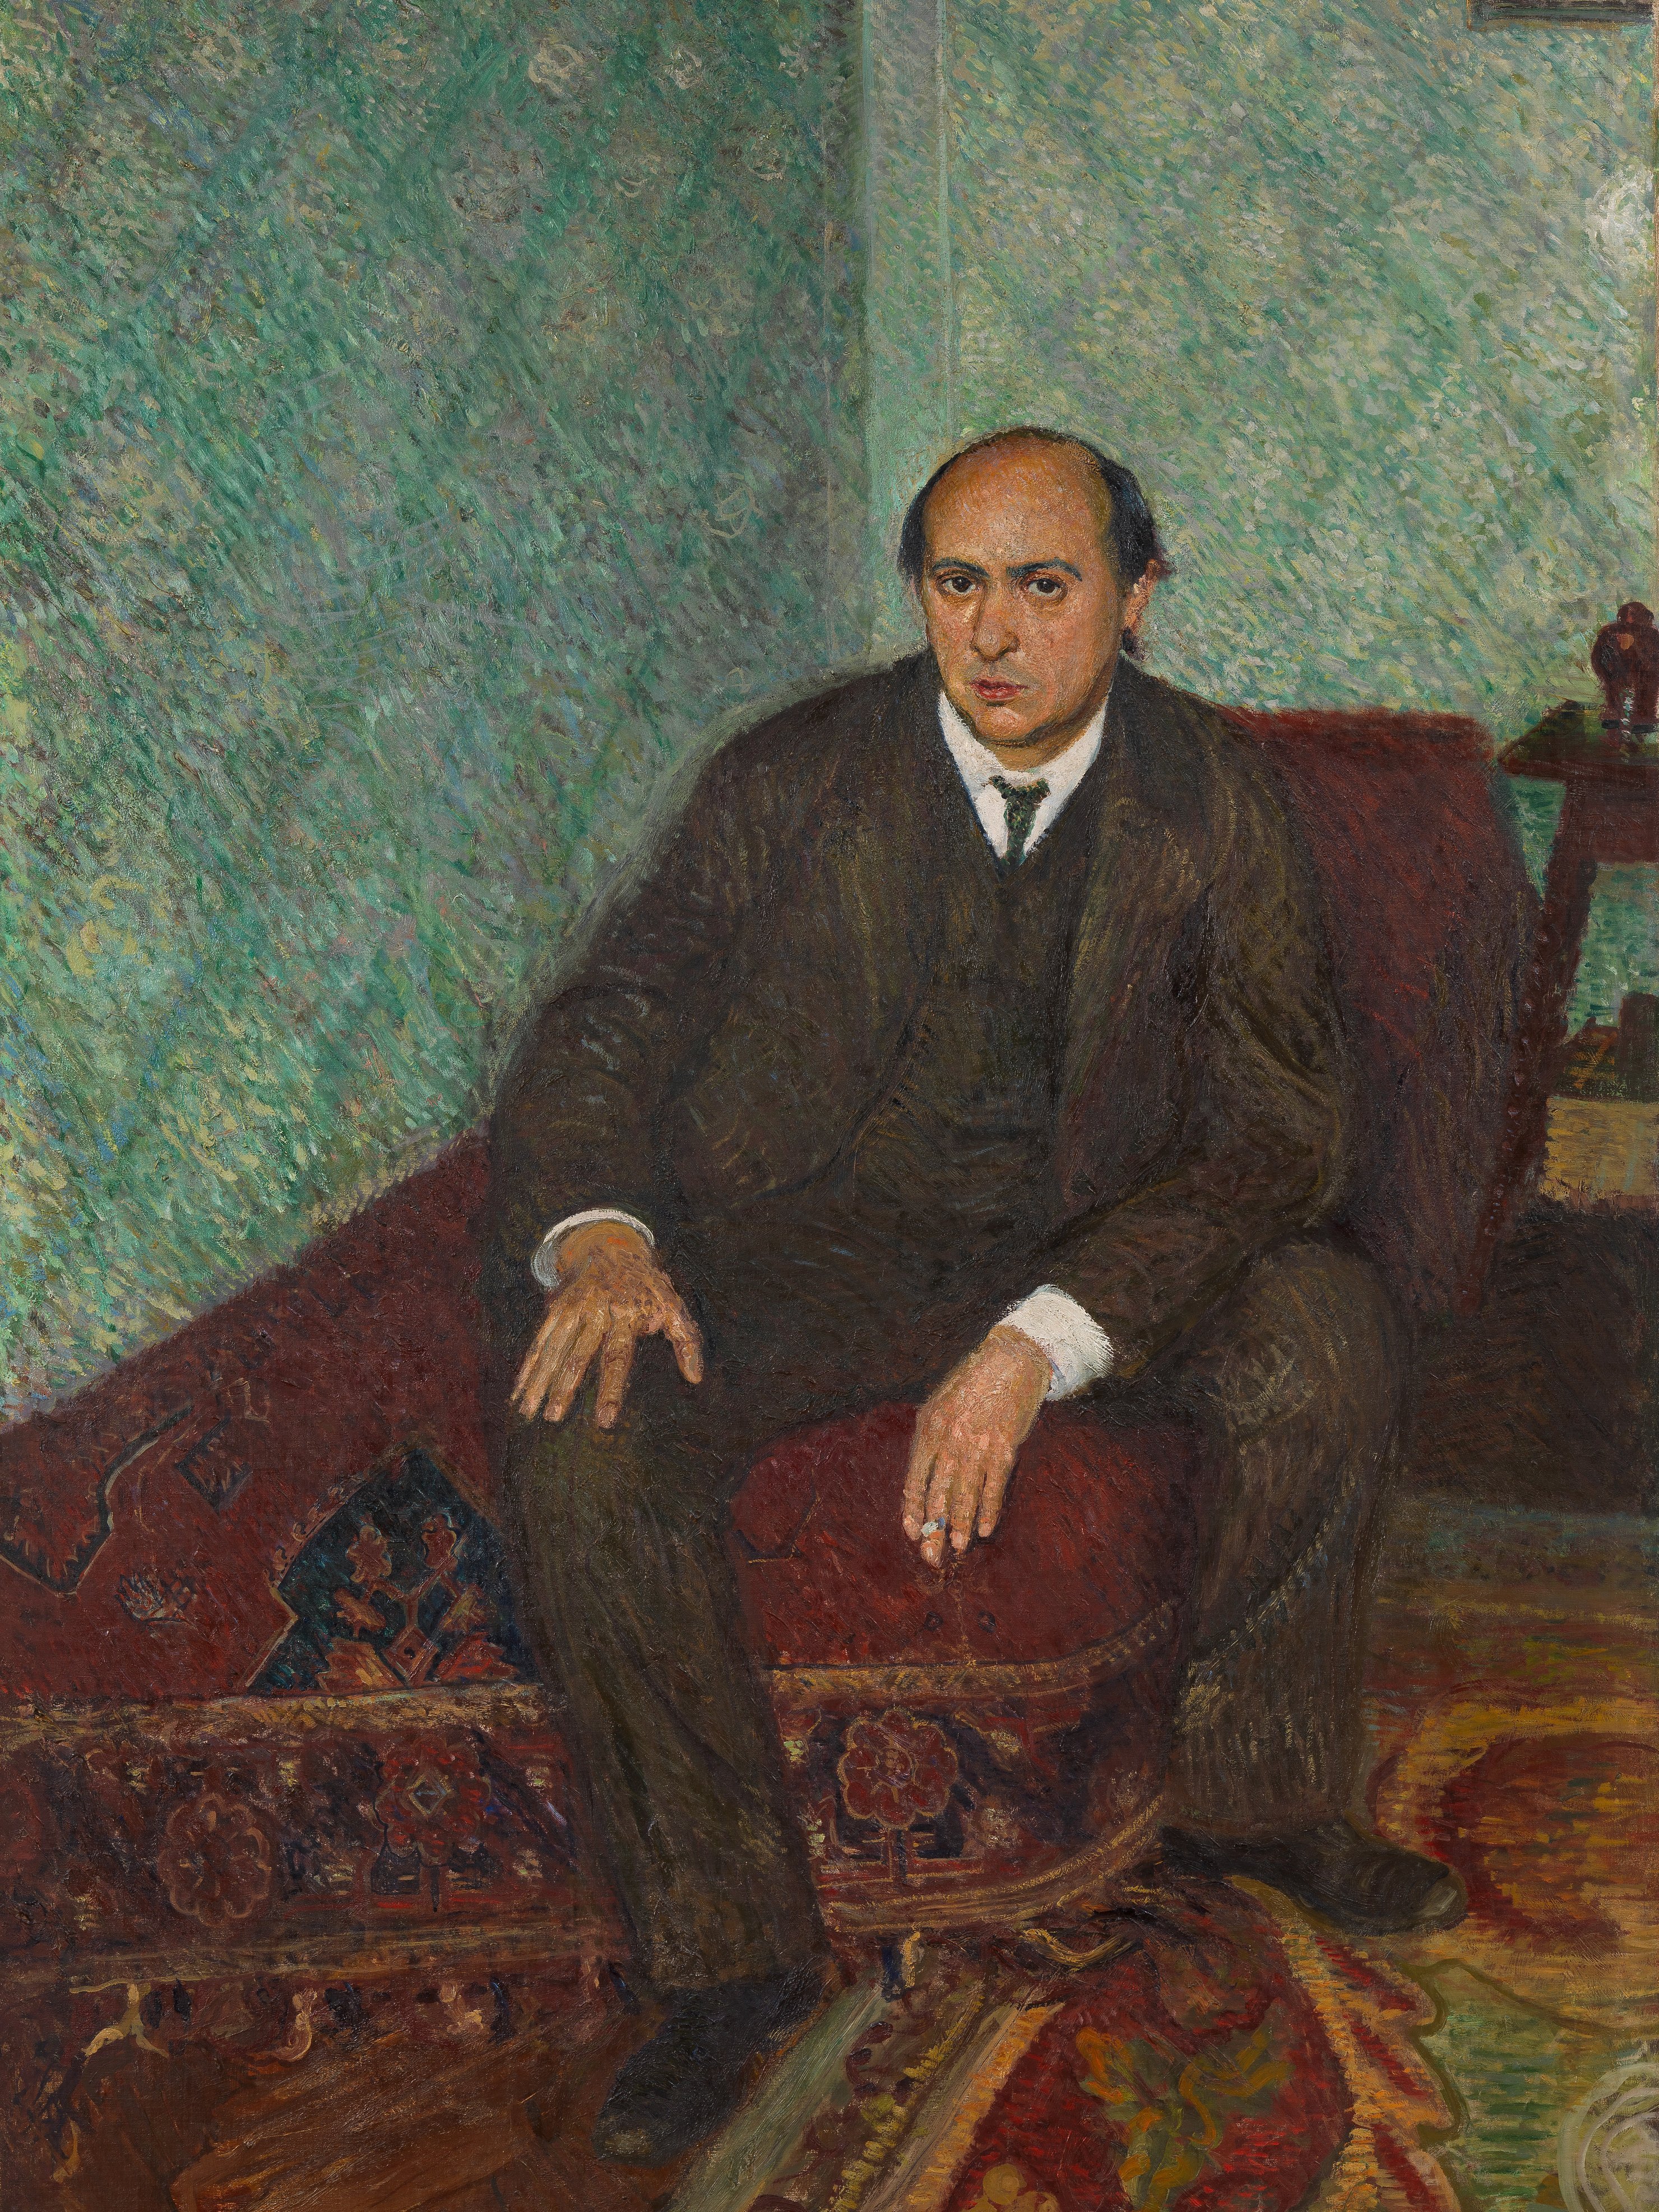 A painting of Schoenberg, sitting on a chair.